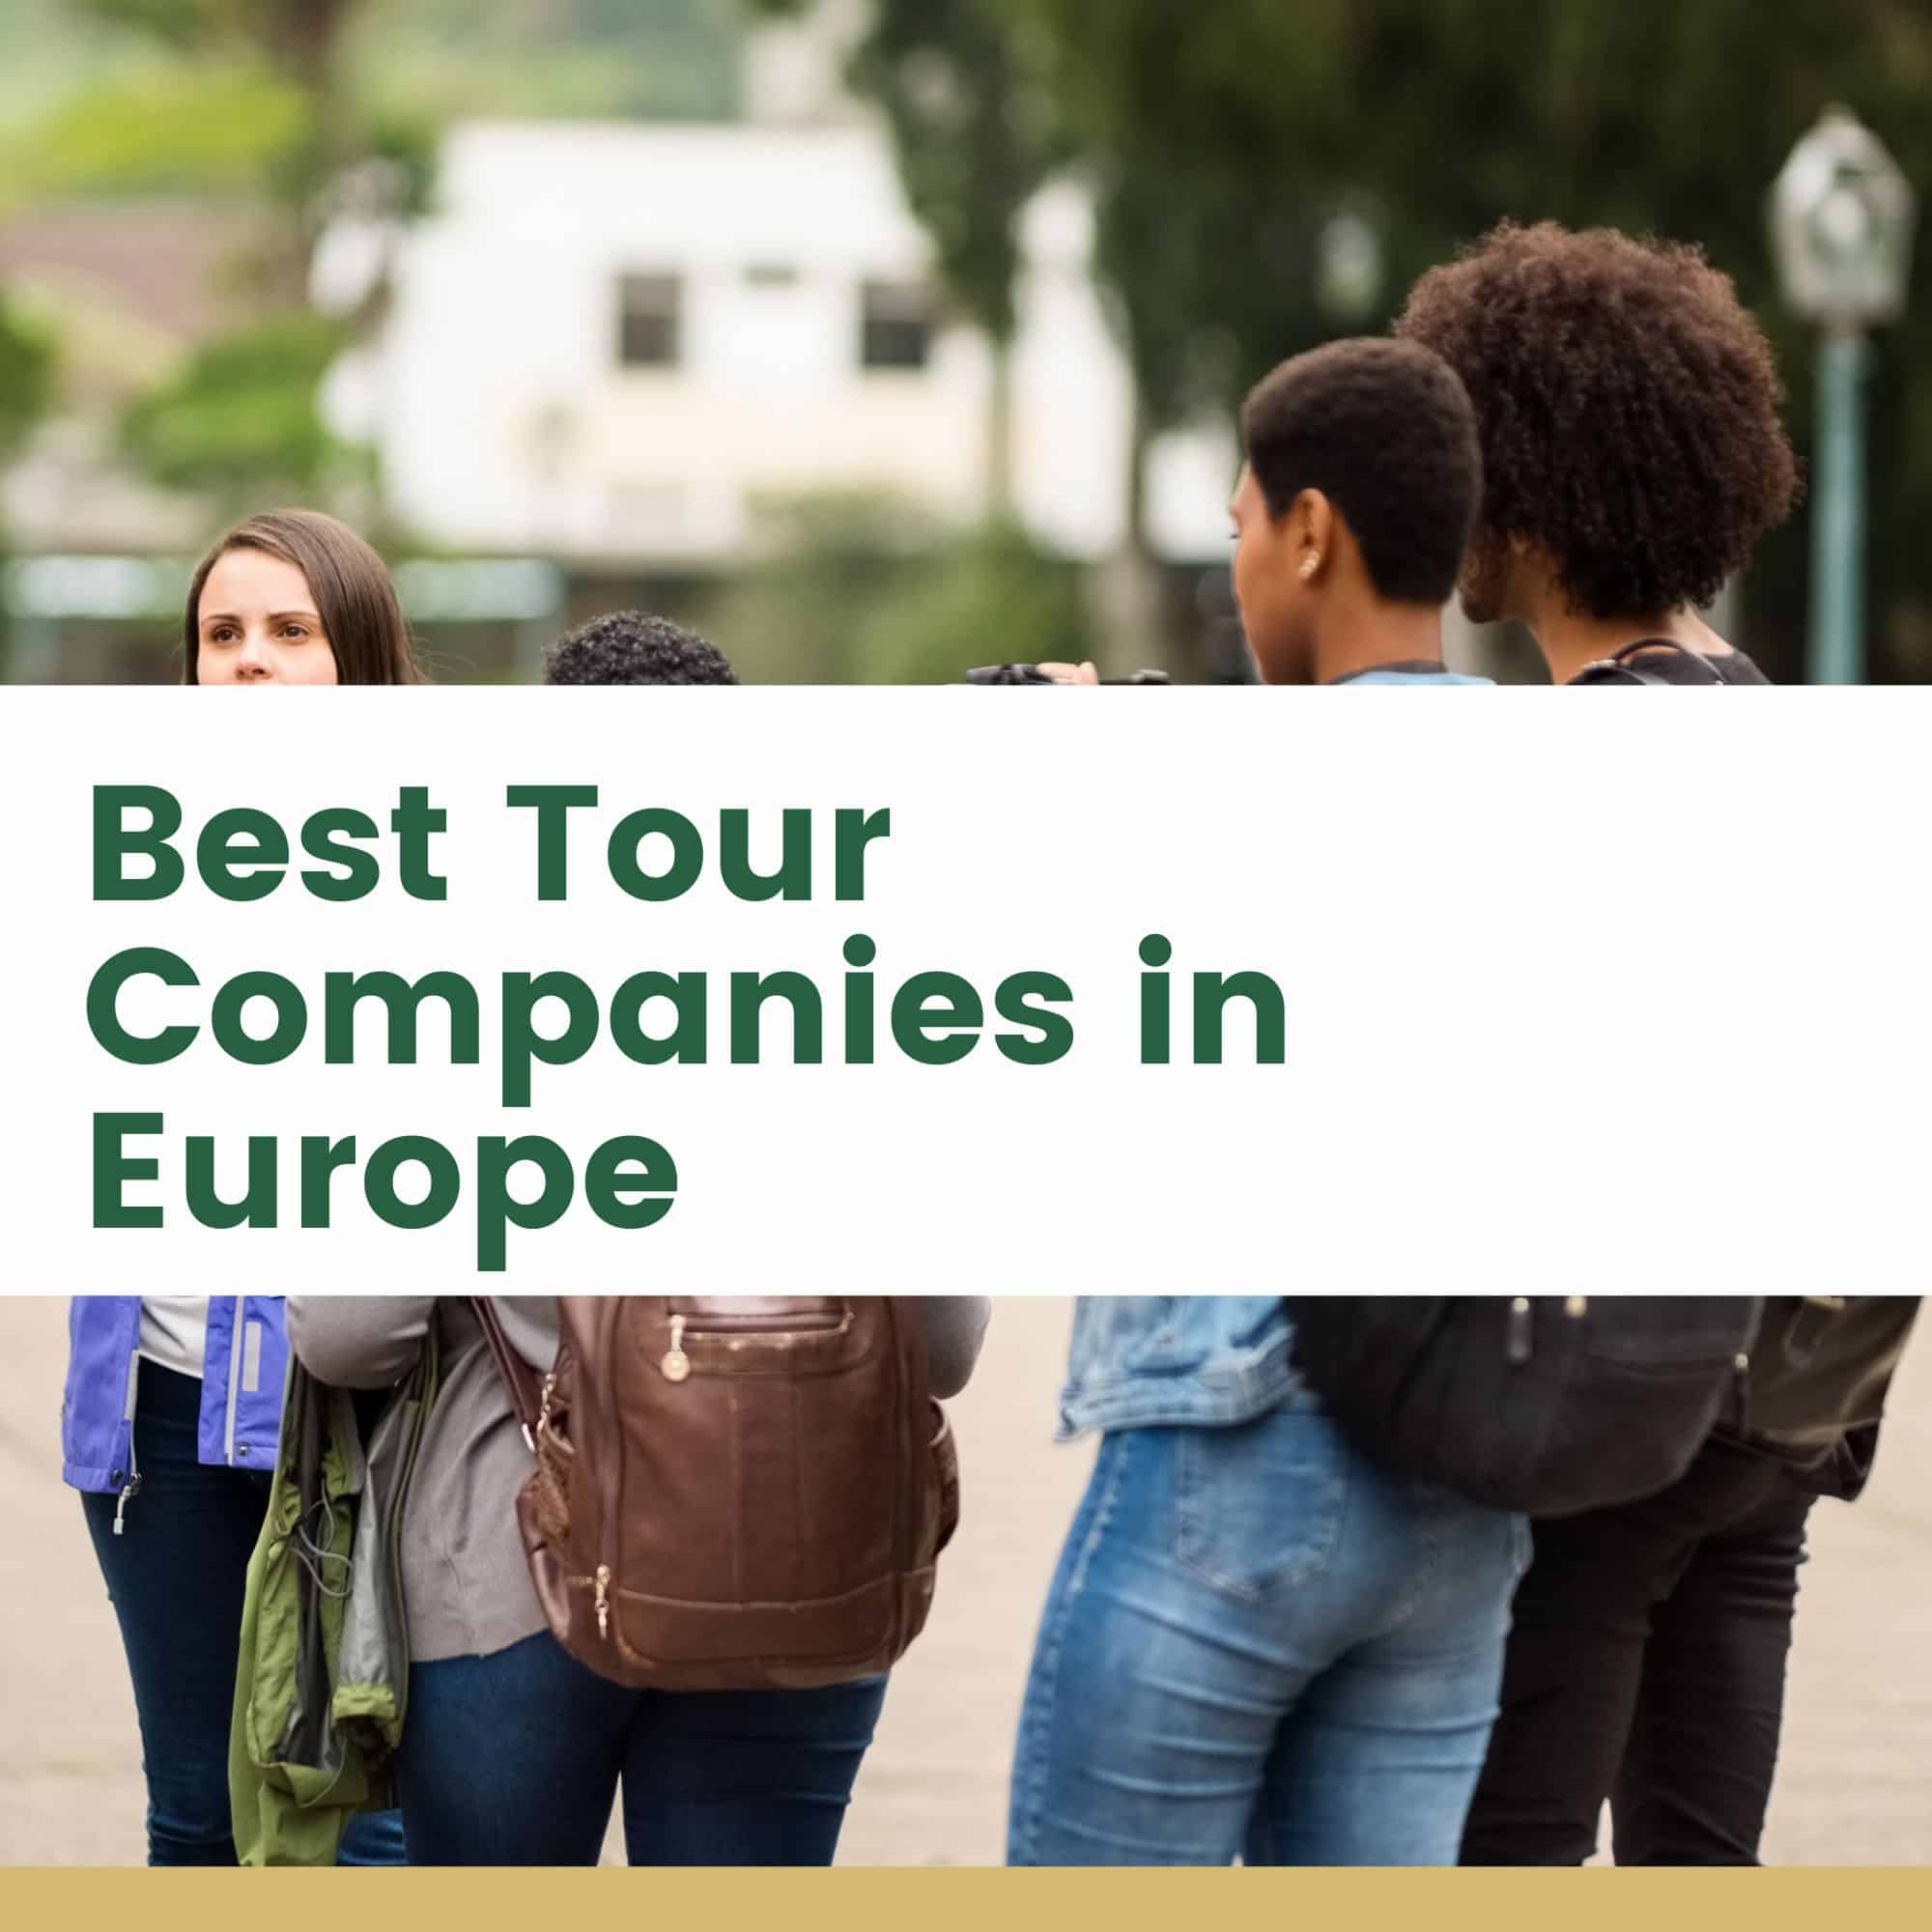 Best Tour Companies in Europe